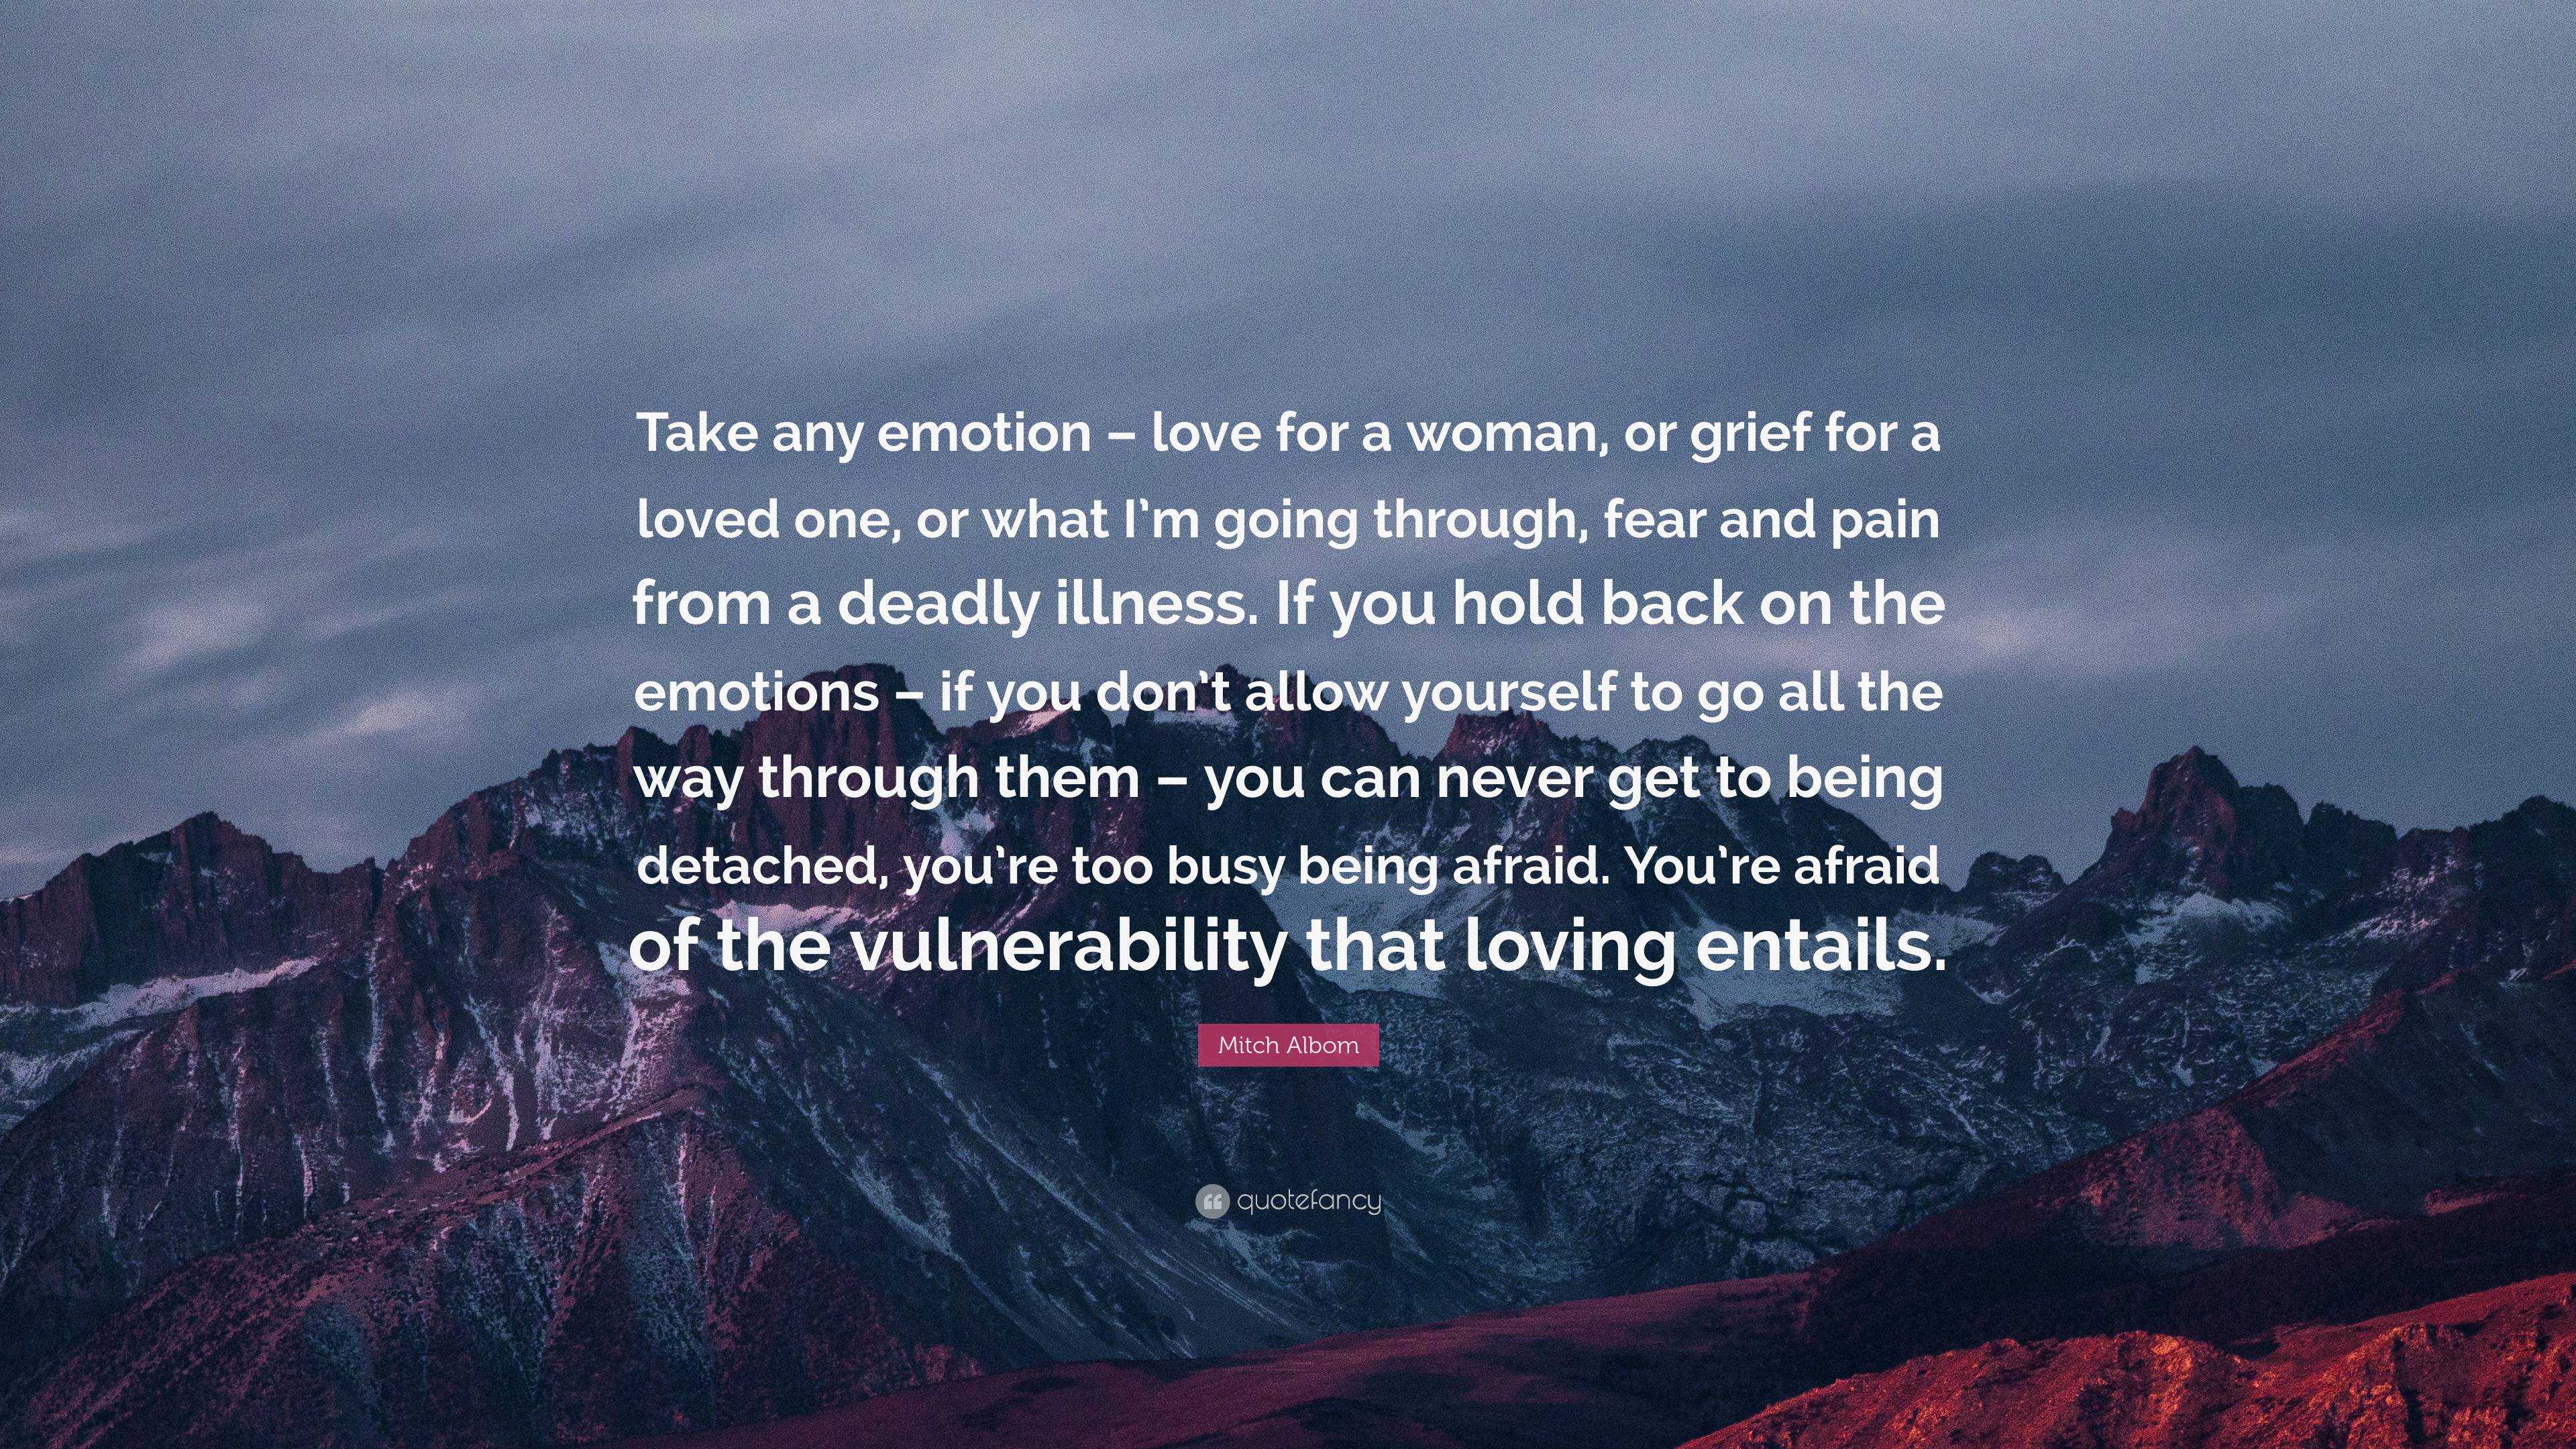 Mitch Albom Quote: “Take any emotion – love for a woman, or grief for a ...